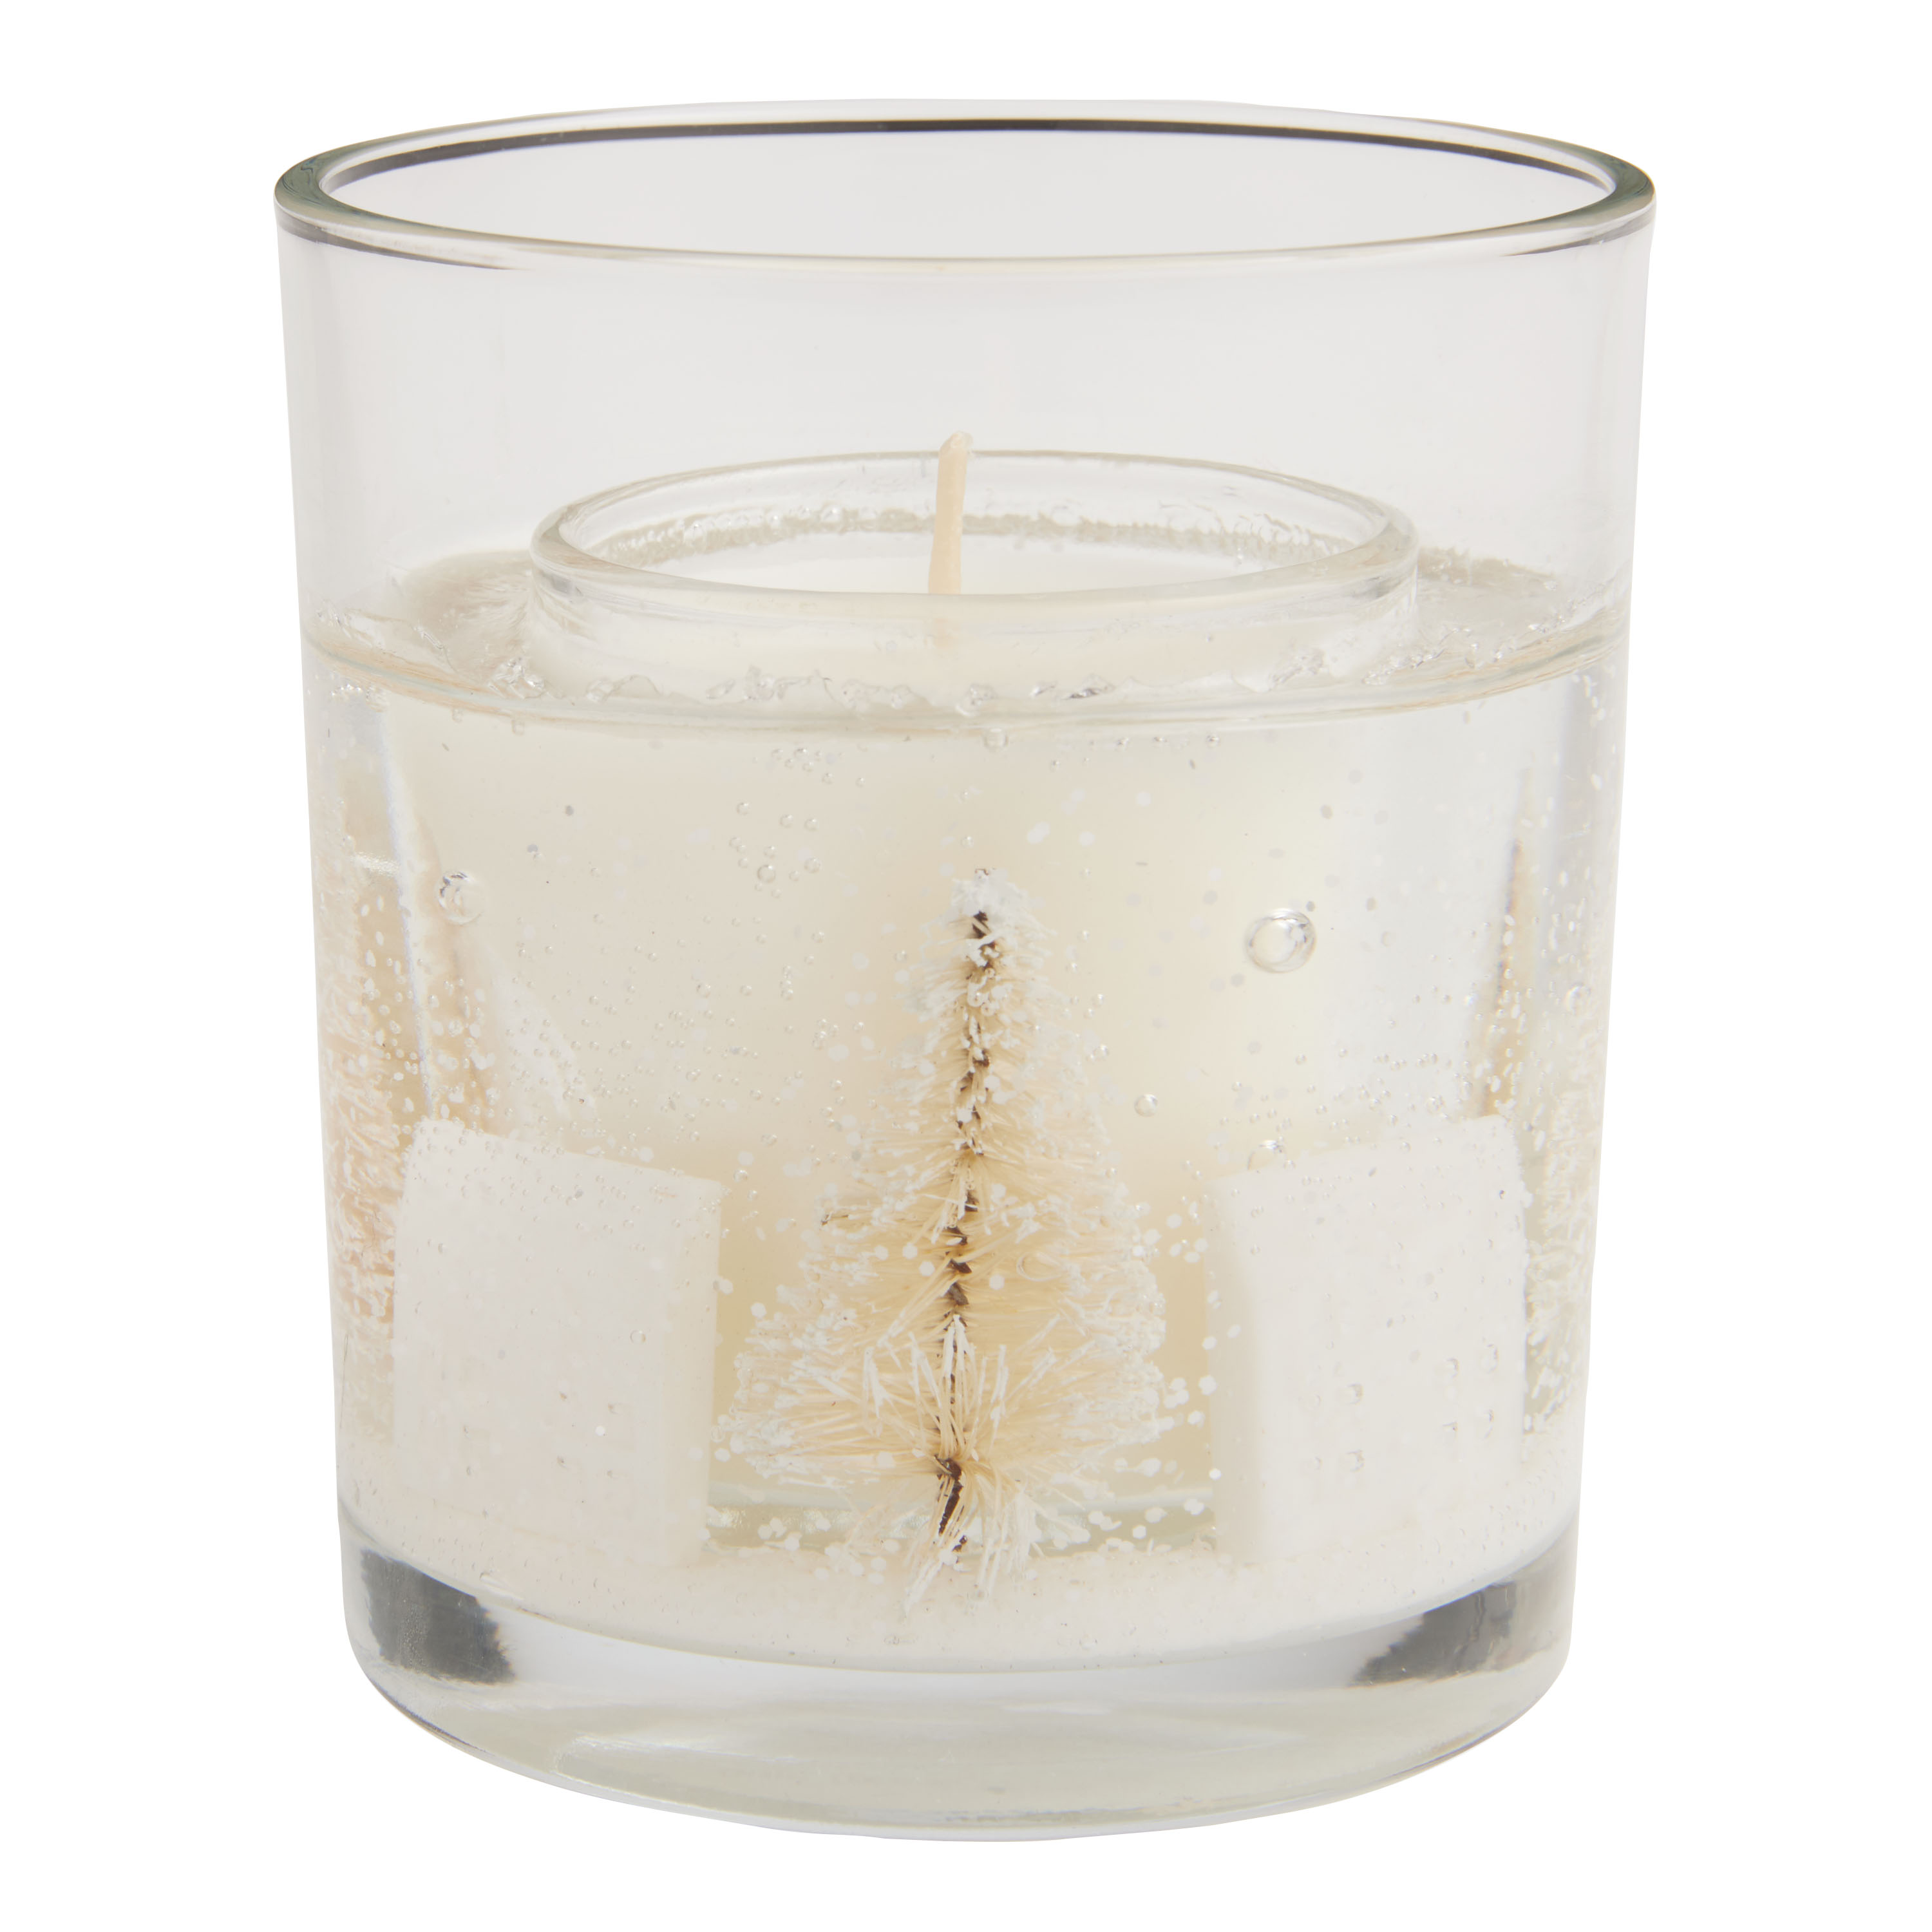 Martini Scented Gel Wax Candle with Wax Olives